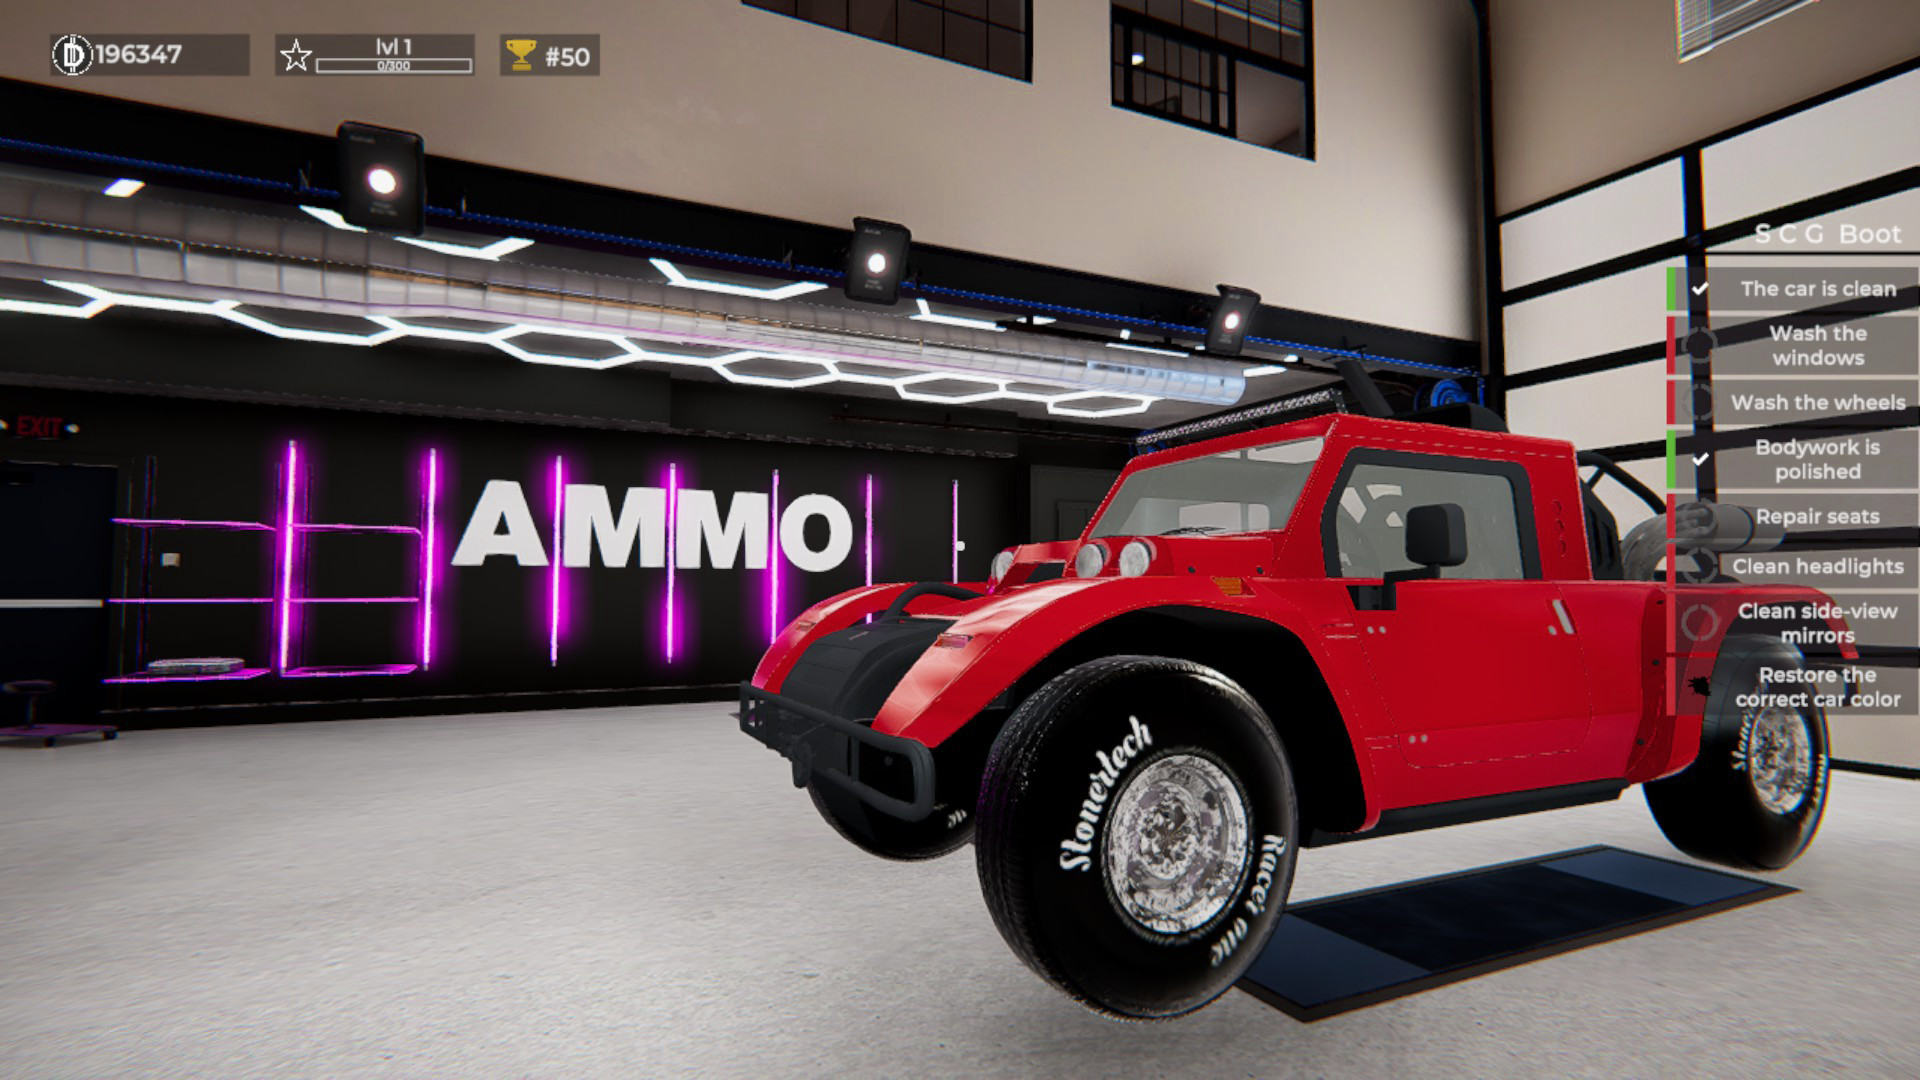 Car Detailing Simulator - AMMO NYC DLC Free Download for PC